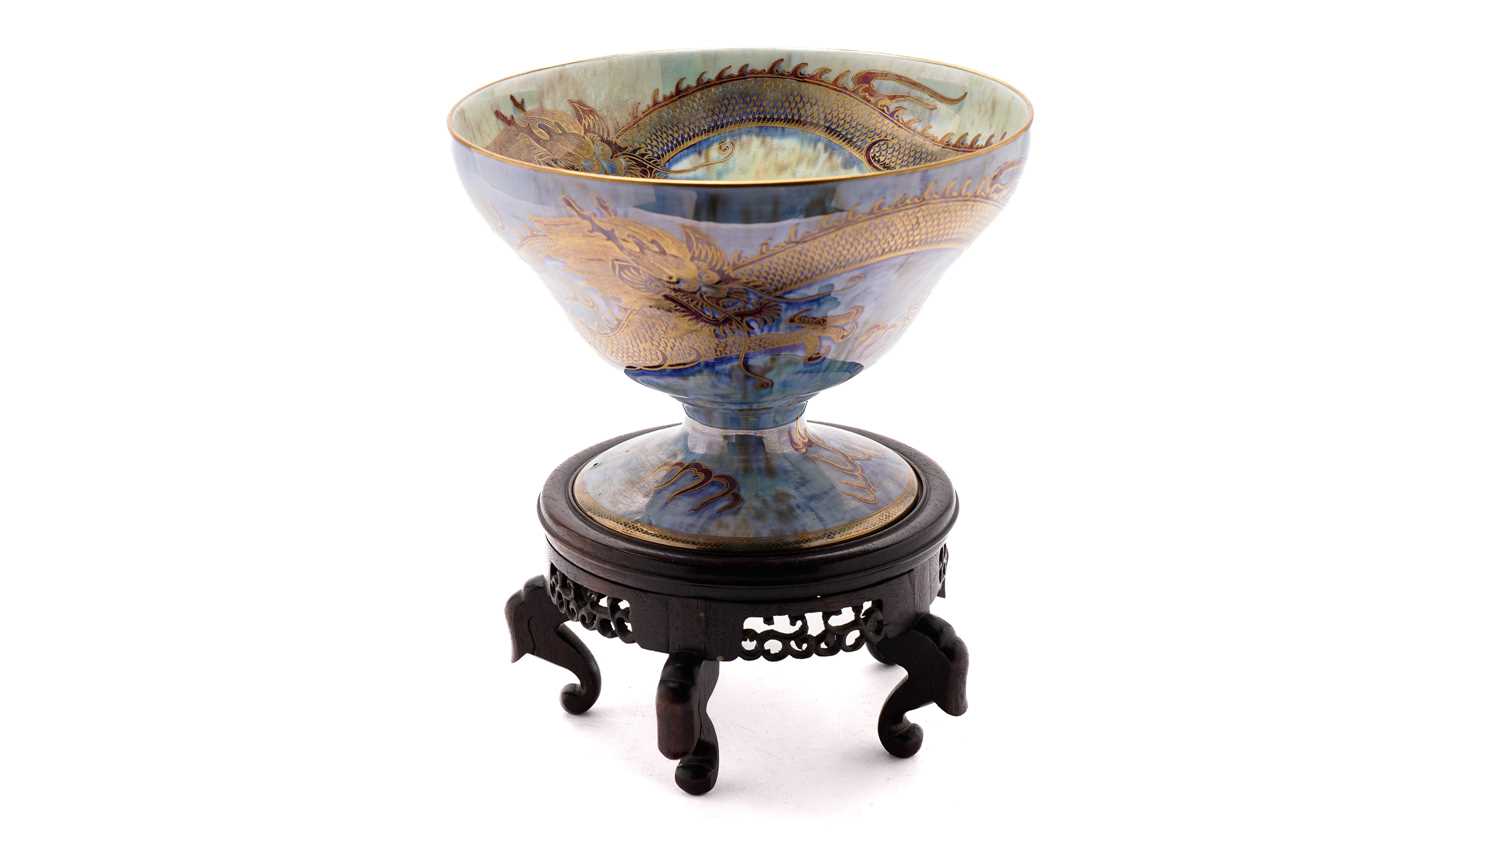 Lot 807 - Wedgwood Dragon Lustre footed bowl